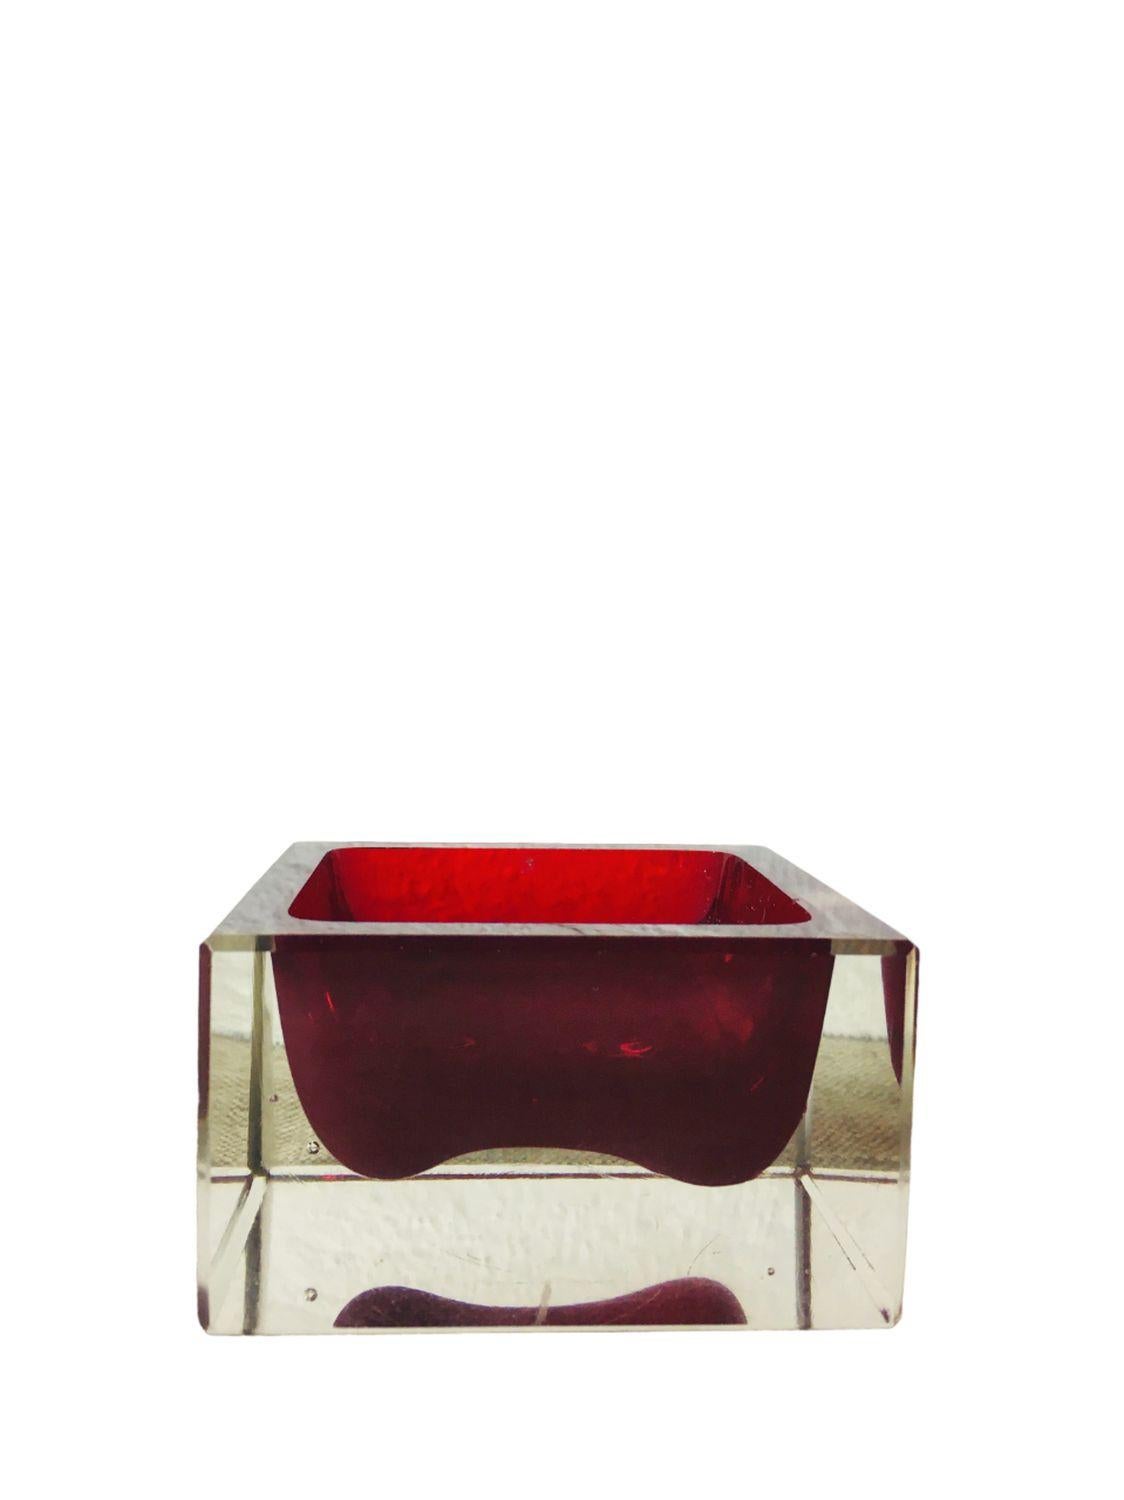 Vintage, mid-century modern Murano glass ashtray in ruby ​​and clear colors from the 1970s. Its timeless design makes it a great addition to both modern and vintage interiors. It is available in perfect condition.